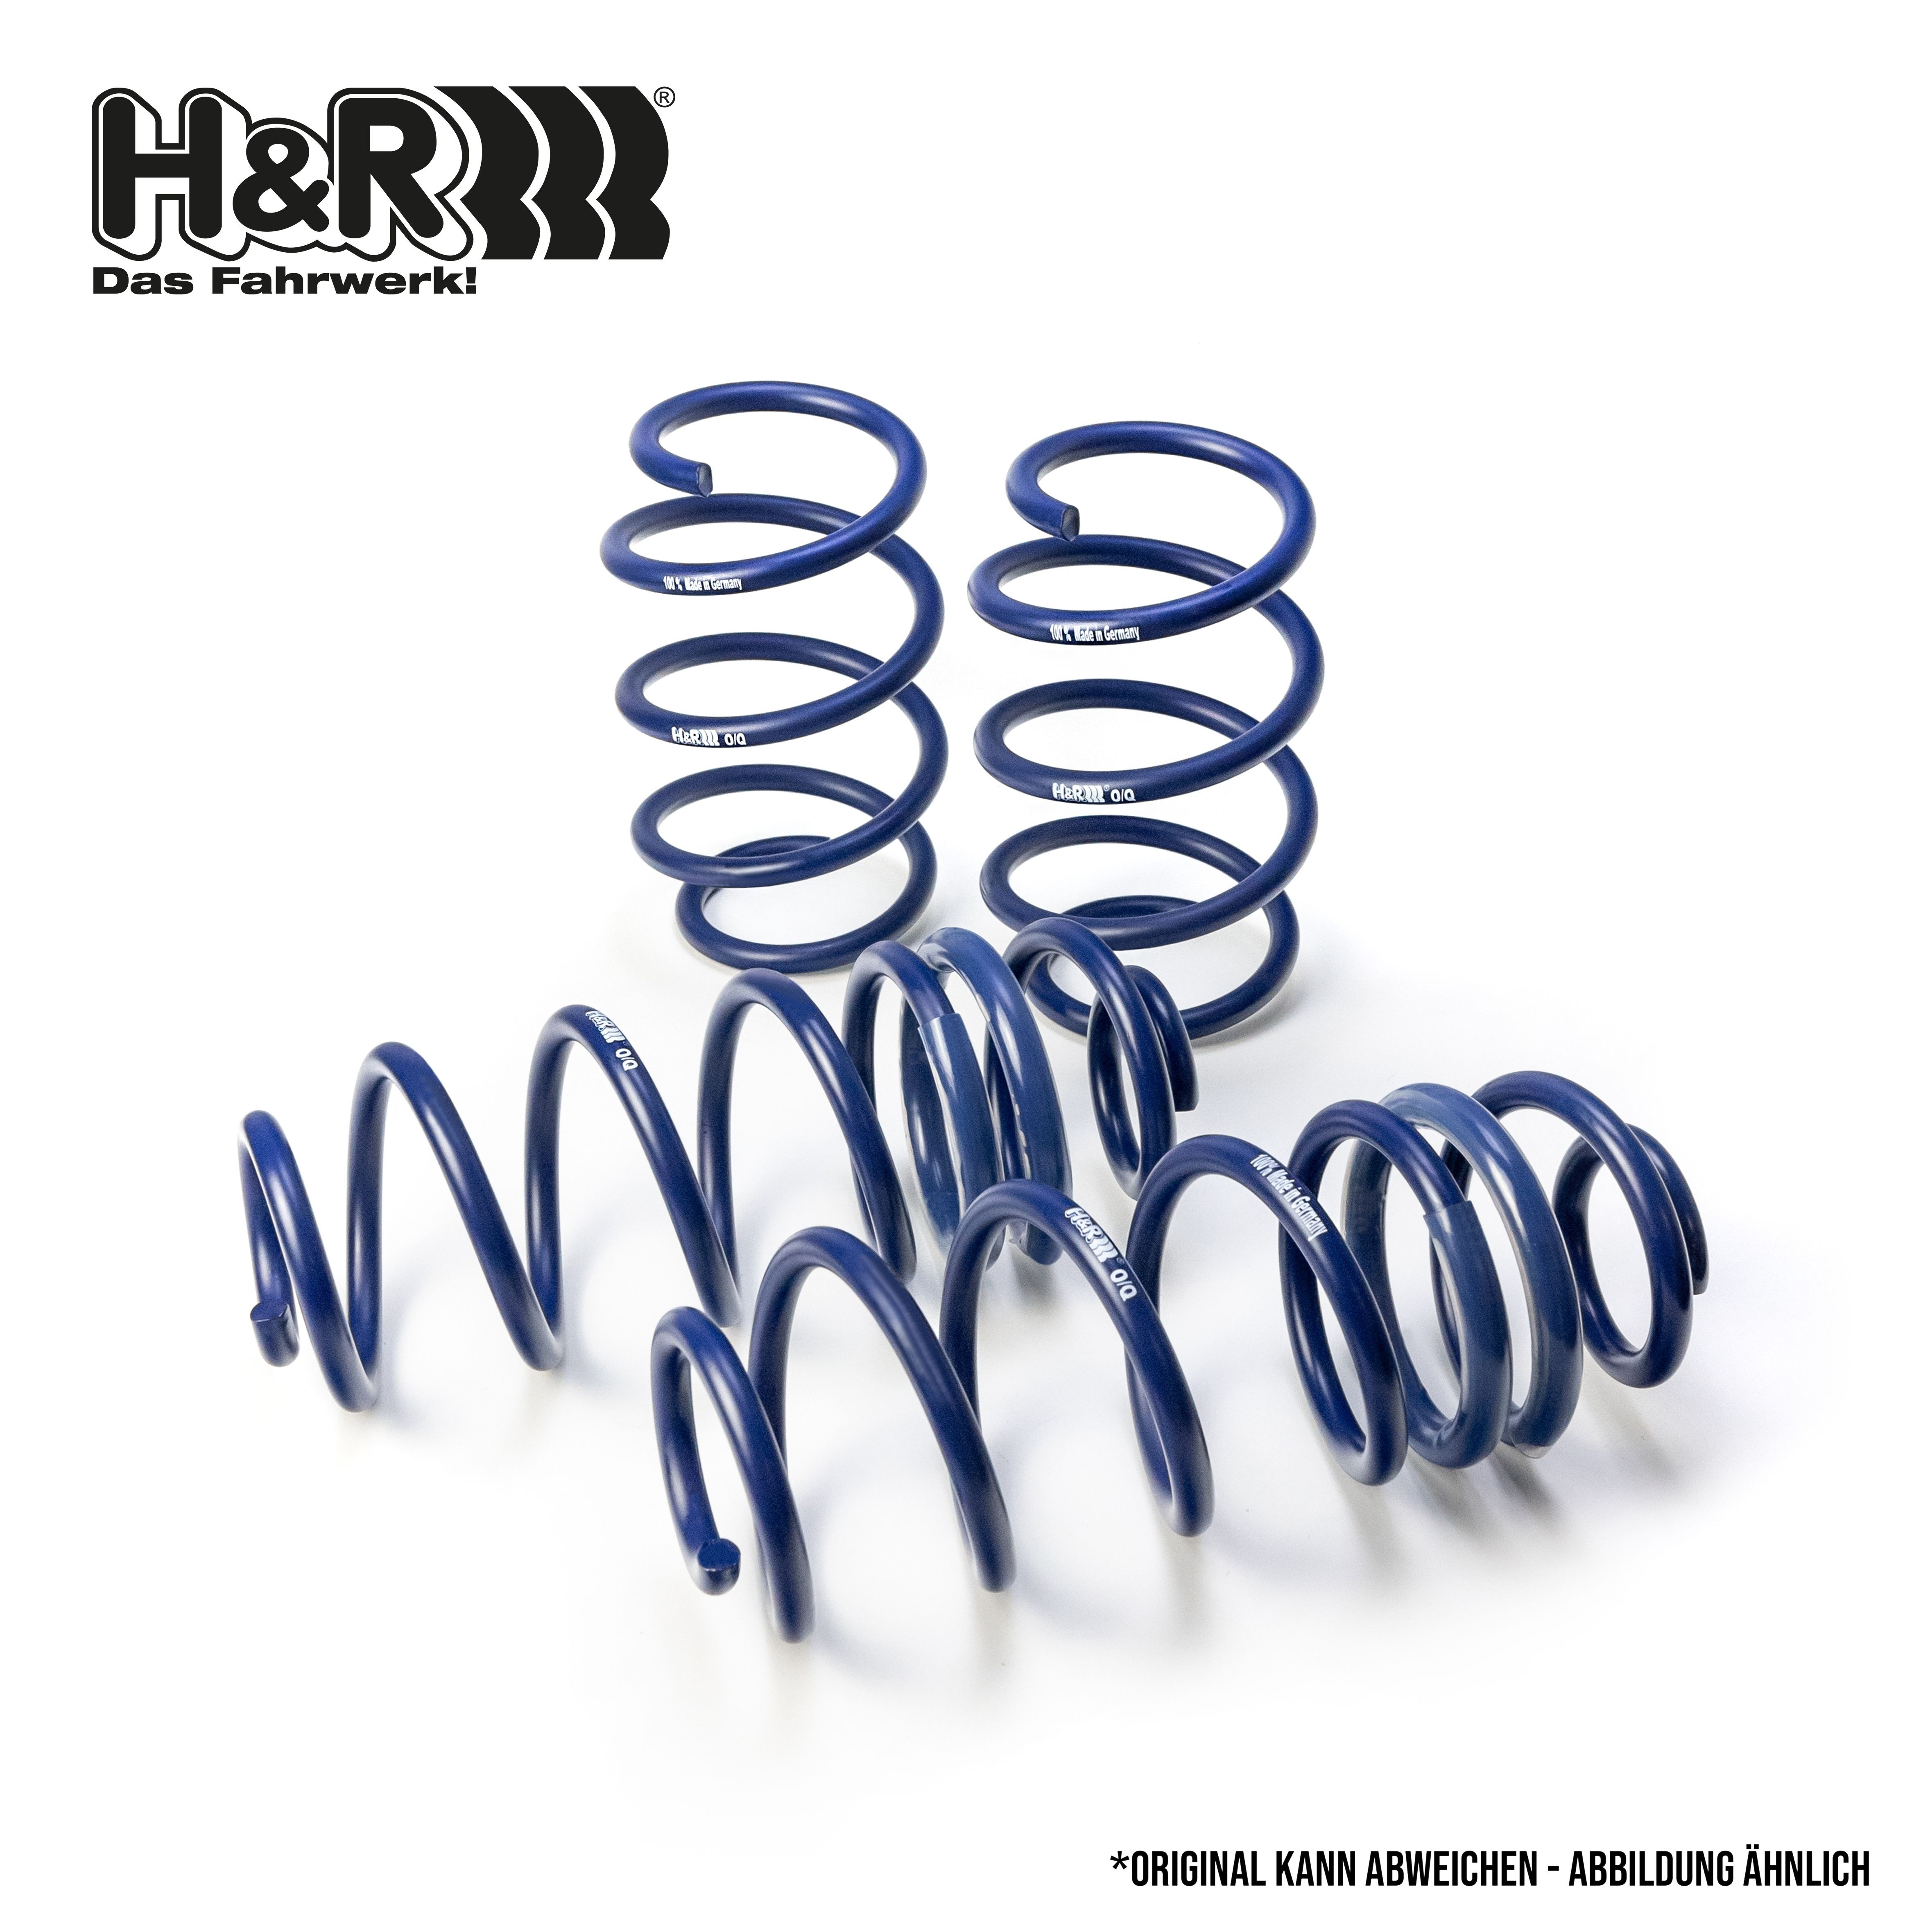 H&R Spring kit 28823-1 for Renault Clio 4